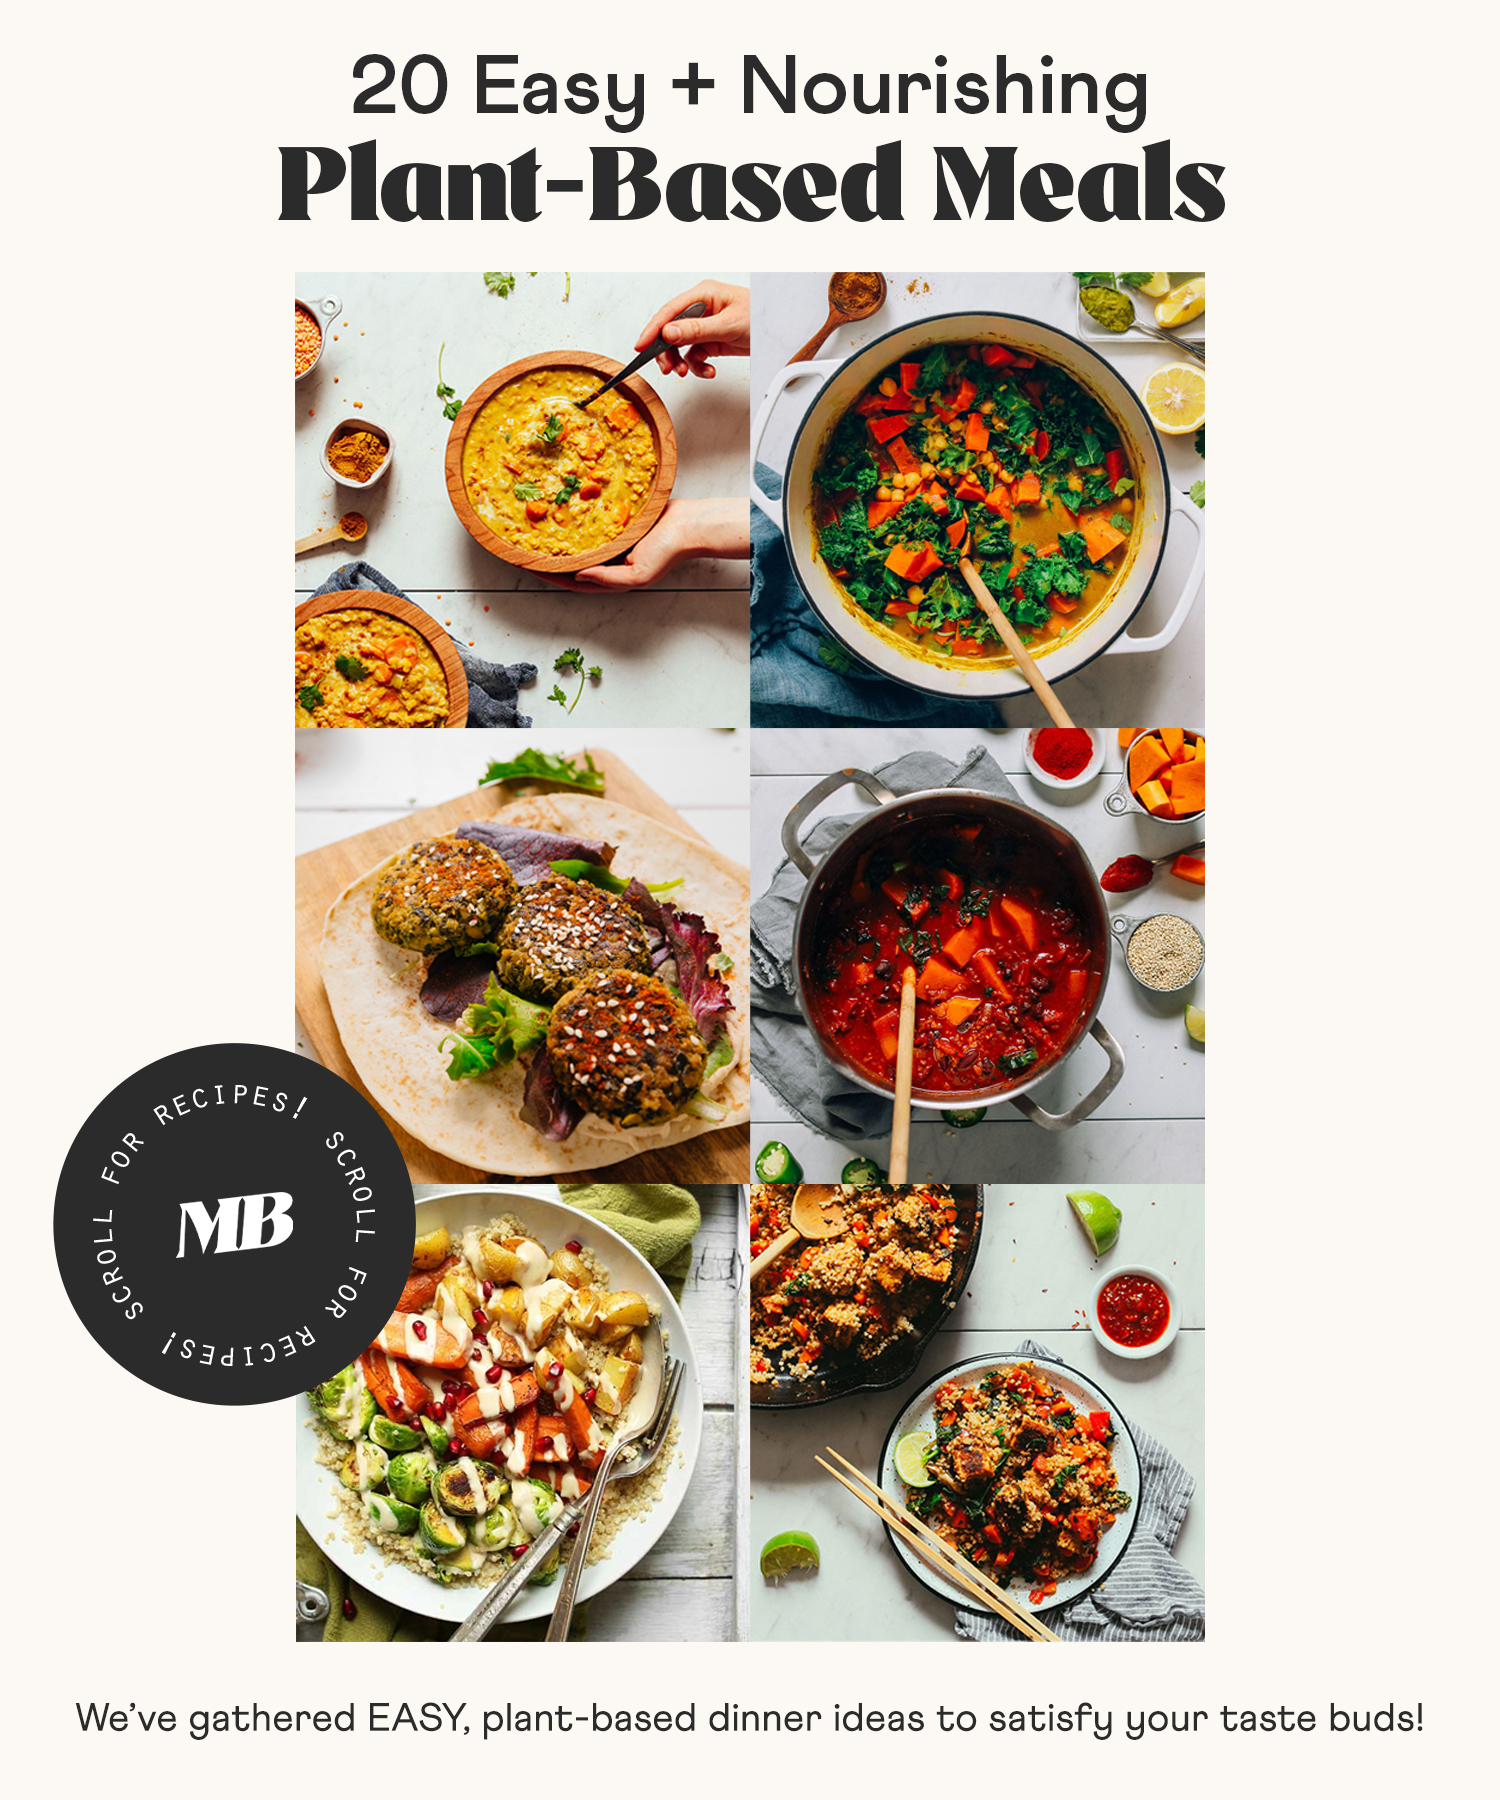 Photos of veggie-packed plant-based meals that are easy to make and nourishing